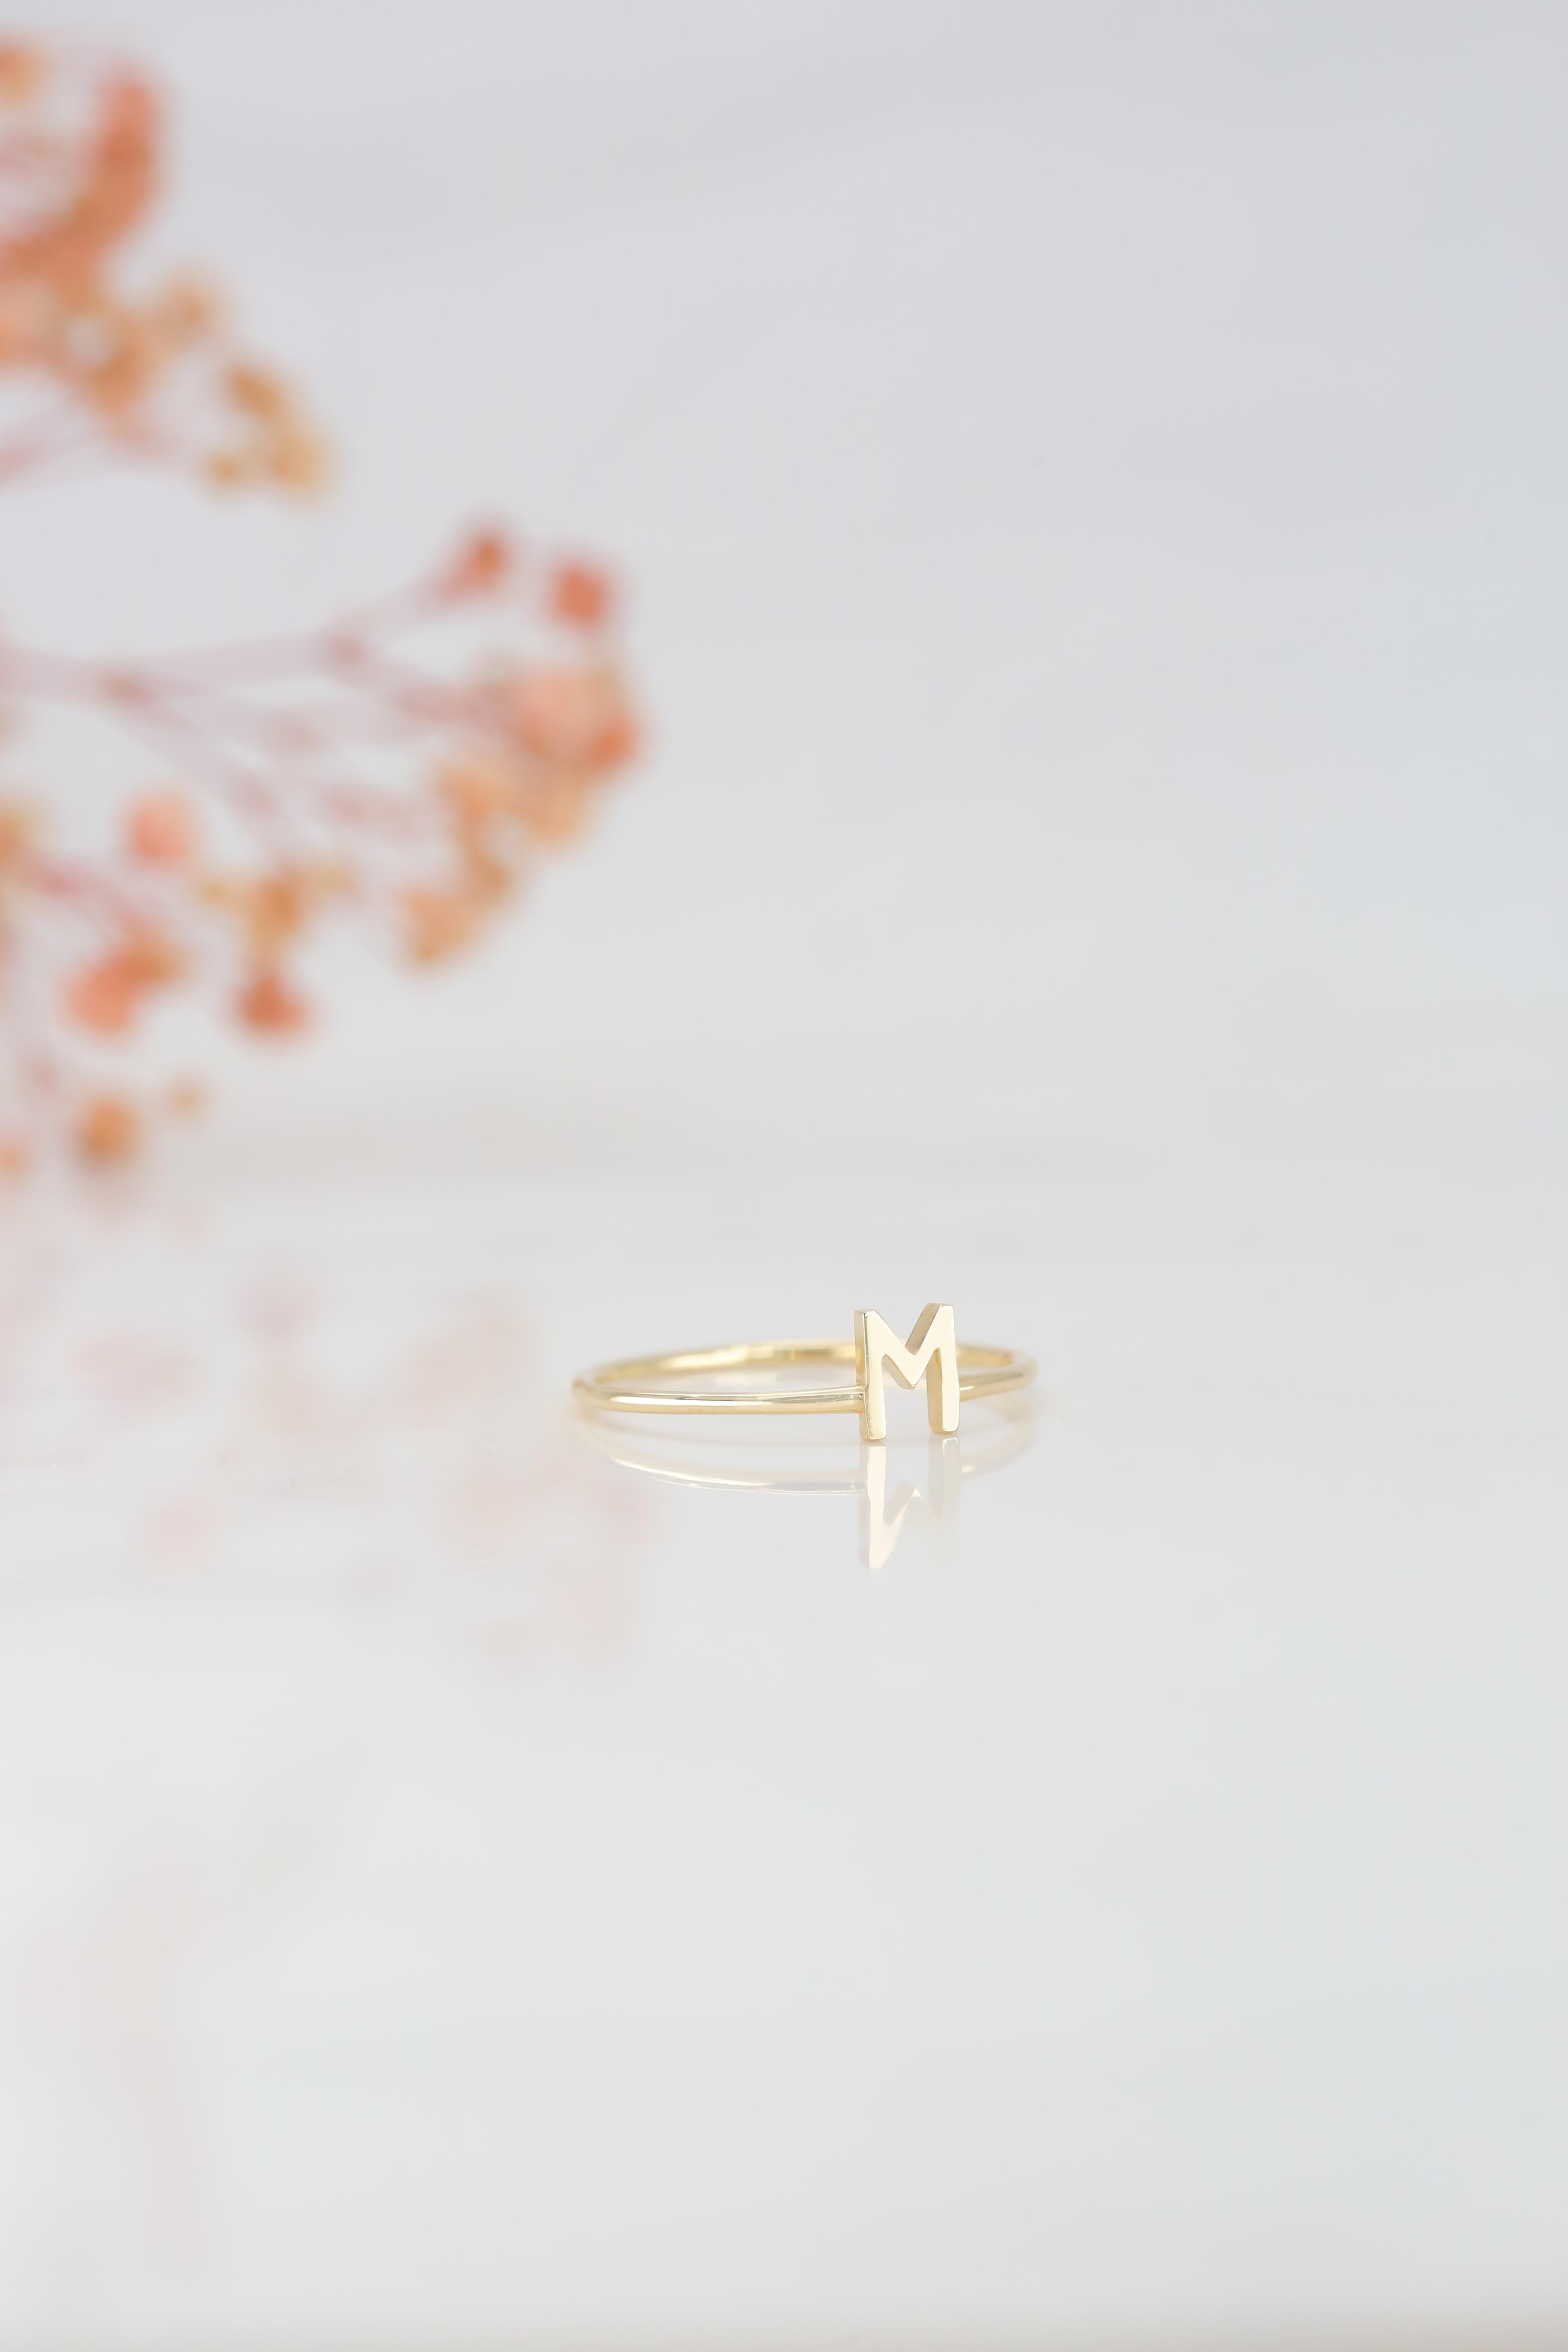 For Sale:  14K Gold Initial M Letter Ring, Personalized Initial Letter Ring 8